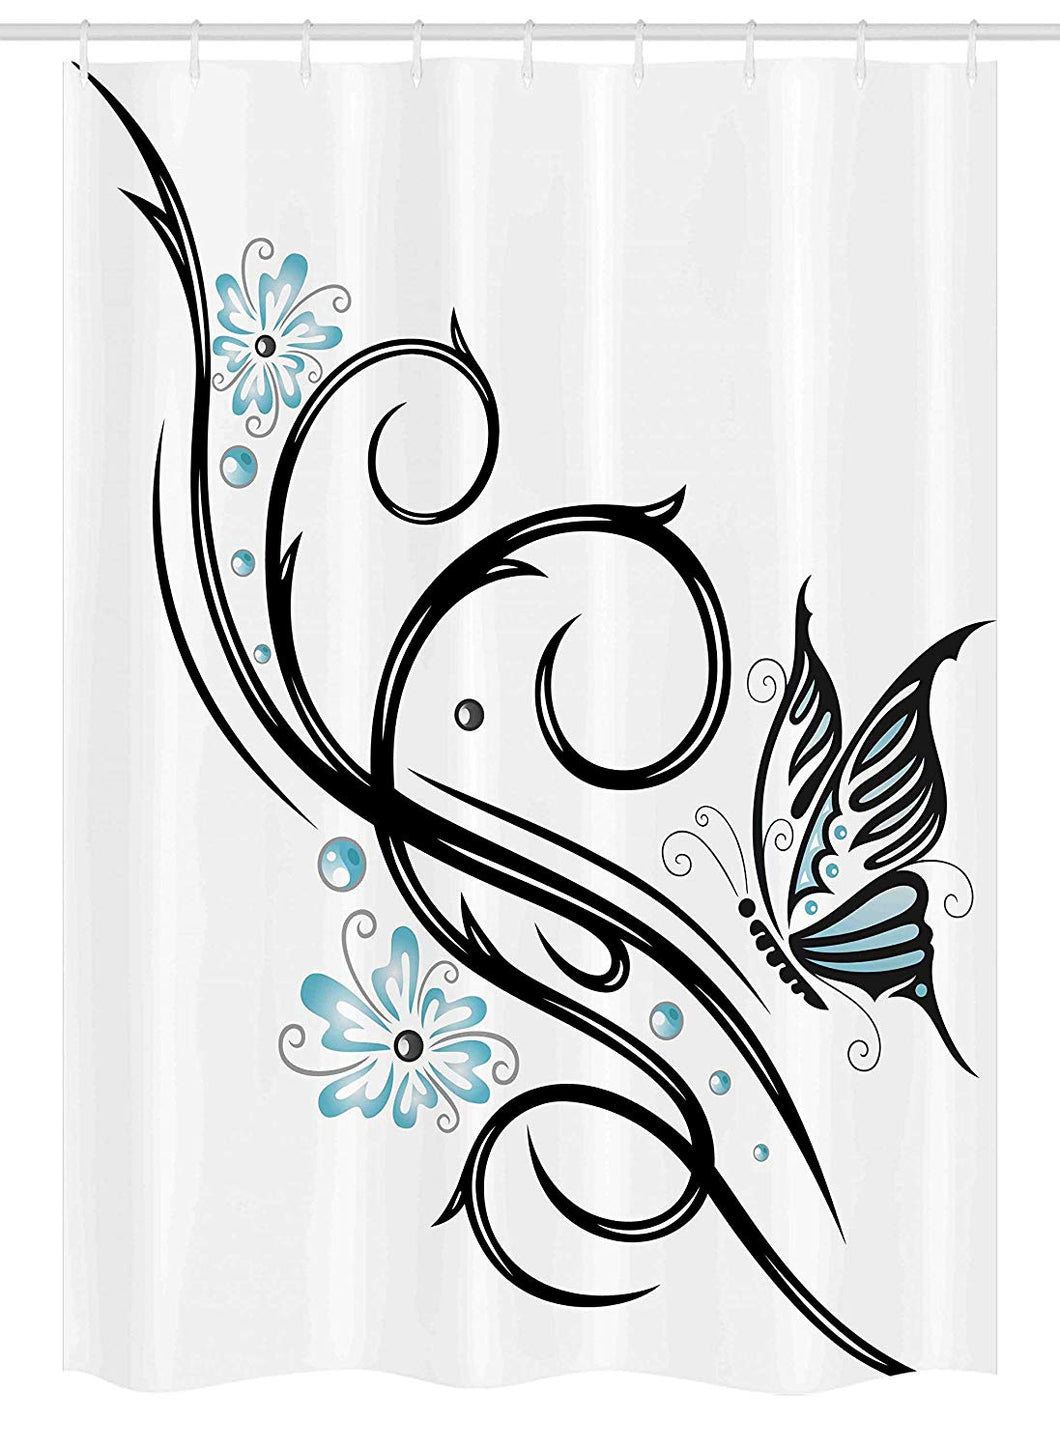 Ambesonne Tattoo Stall Shower Curtain, Leaf Like Design with Blue Flowers and a Flying Butterfly Image Print, Fabric Bathroom Decor Set with Hooks, 54